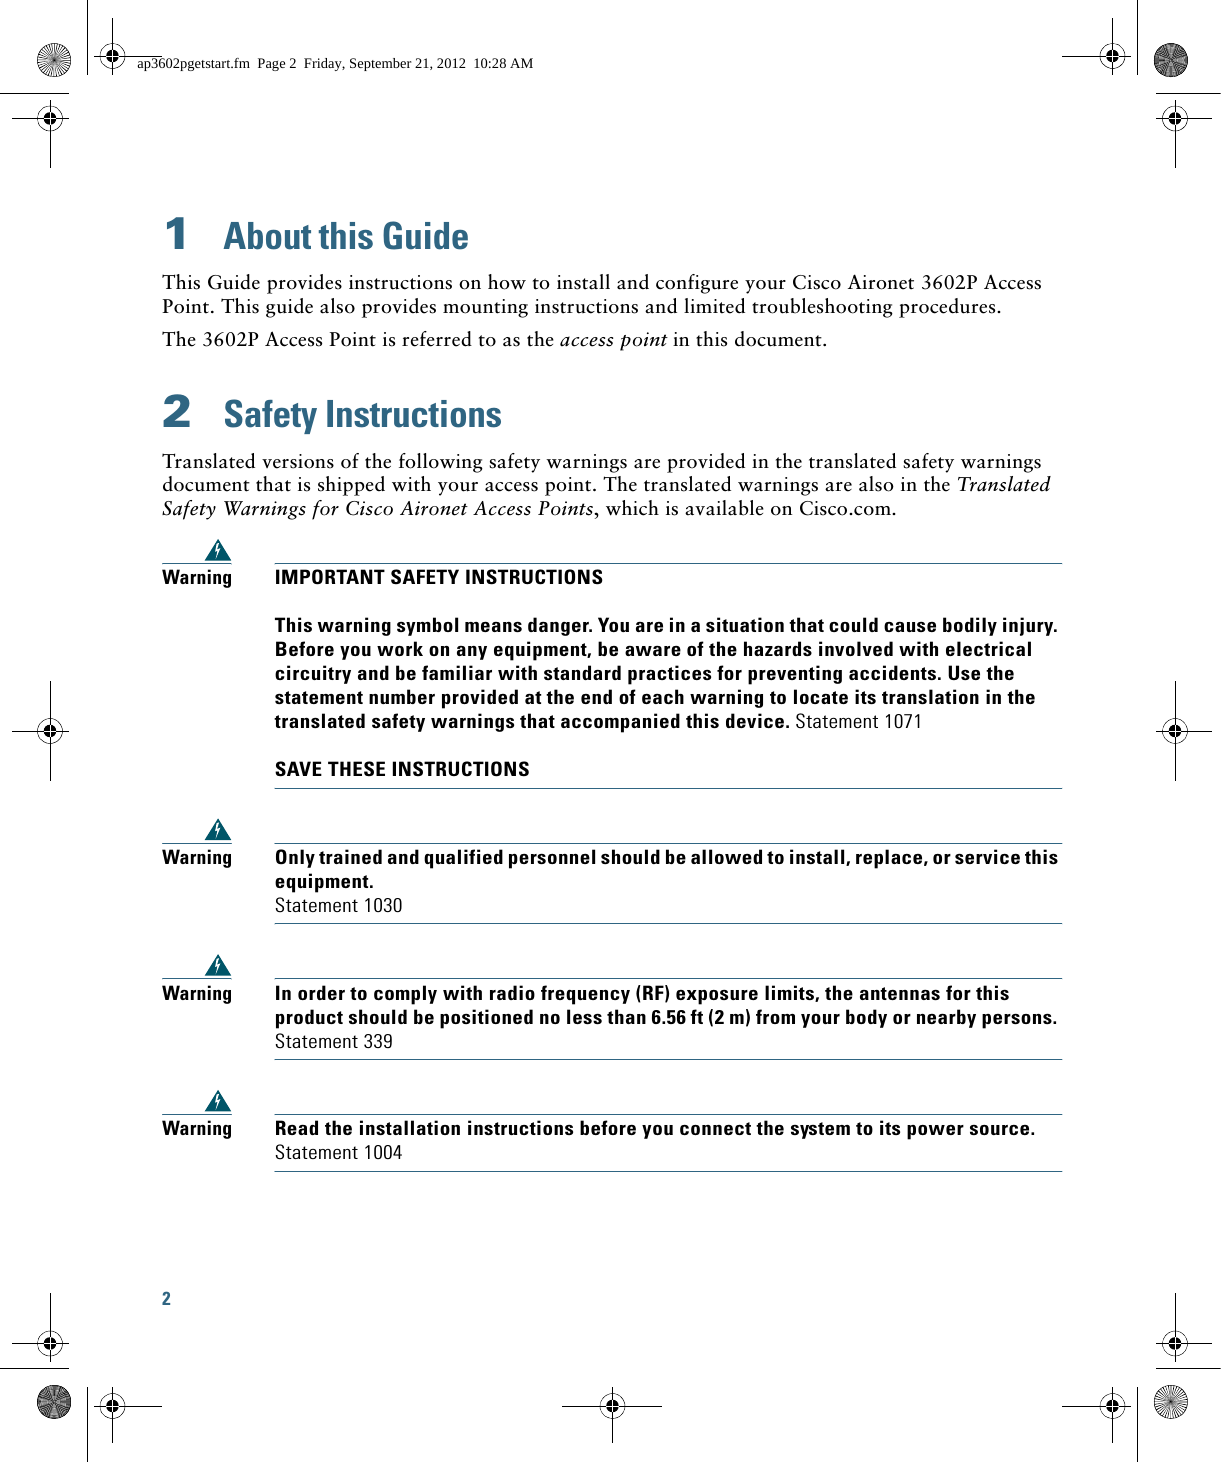 2 1  About this GuideThis Guide provides instructions on how to install and configure your Cisco Aironet 3602P Access Point. This guide also provides mounting instructions and limited troubleshooting procedures.The 3602P Access Point is referred to as the access point in this document.2  Safety InstructionsTranslated versions of the following safety warnings are provided in the translated safety warnings document that is shipped with your access point. The translated warnings are also in the Translated Safety Warnings for Cisco Aironet Access Points, which is available on Cisco.com.WarningIMPORTANT SAFETY INSTRUCTIONSThis warning symbol means danger. You are in a situation that could cause bodily injury. Before you work on any equipment, be aware of the hazards involved with electrical circuitry and be familiar with standard practices for preventing accidents. Use the statement number provided at the end of each warning to locate its translation in the translated safety warnings that accompanied this device. Statement 1071SAVE THESE INSTRUCTIONSWarningOnly trained and qualified personnel should be allowed to install, replace, or service this equipment.Statement 1030WarningIn order to comply with radio frequency (RF) exposure limits, the antennas for this product should be positioned no less than 6.56 ft (2 m) from your body or nearby persons. Statement 339WarningRead the installation instructions before you connect the system to its power source. Statement 1004ap3602pgetstart.fm  Page 2  Friday, September 21, 2012  10:28 AM